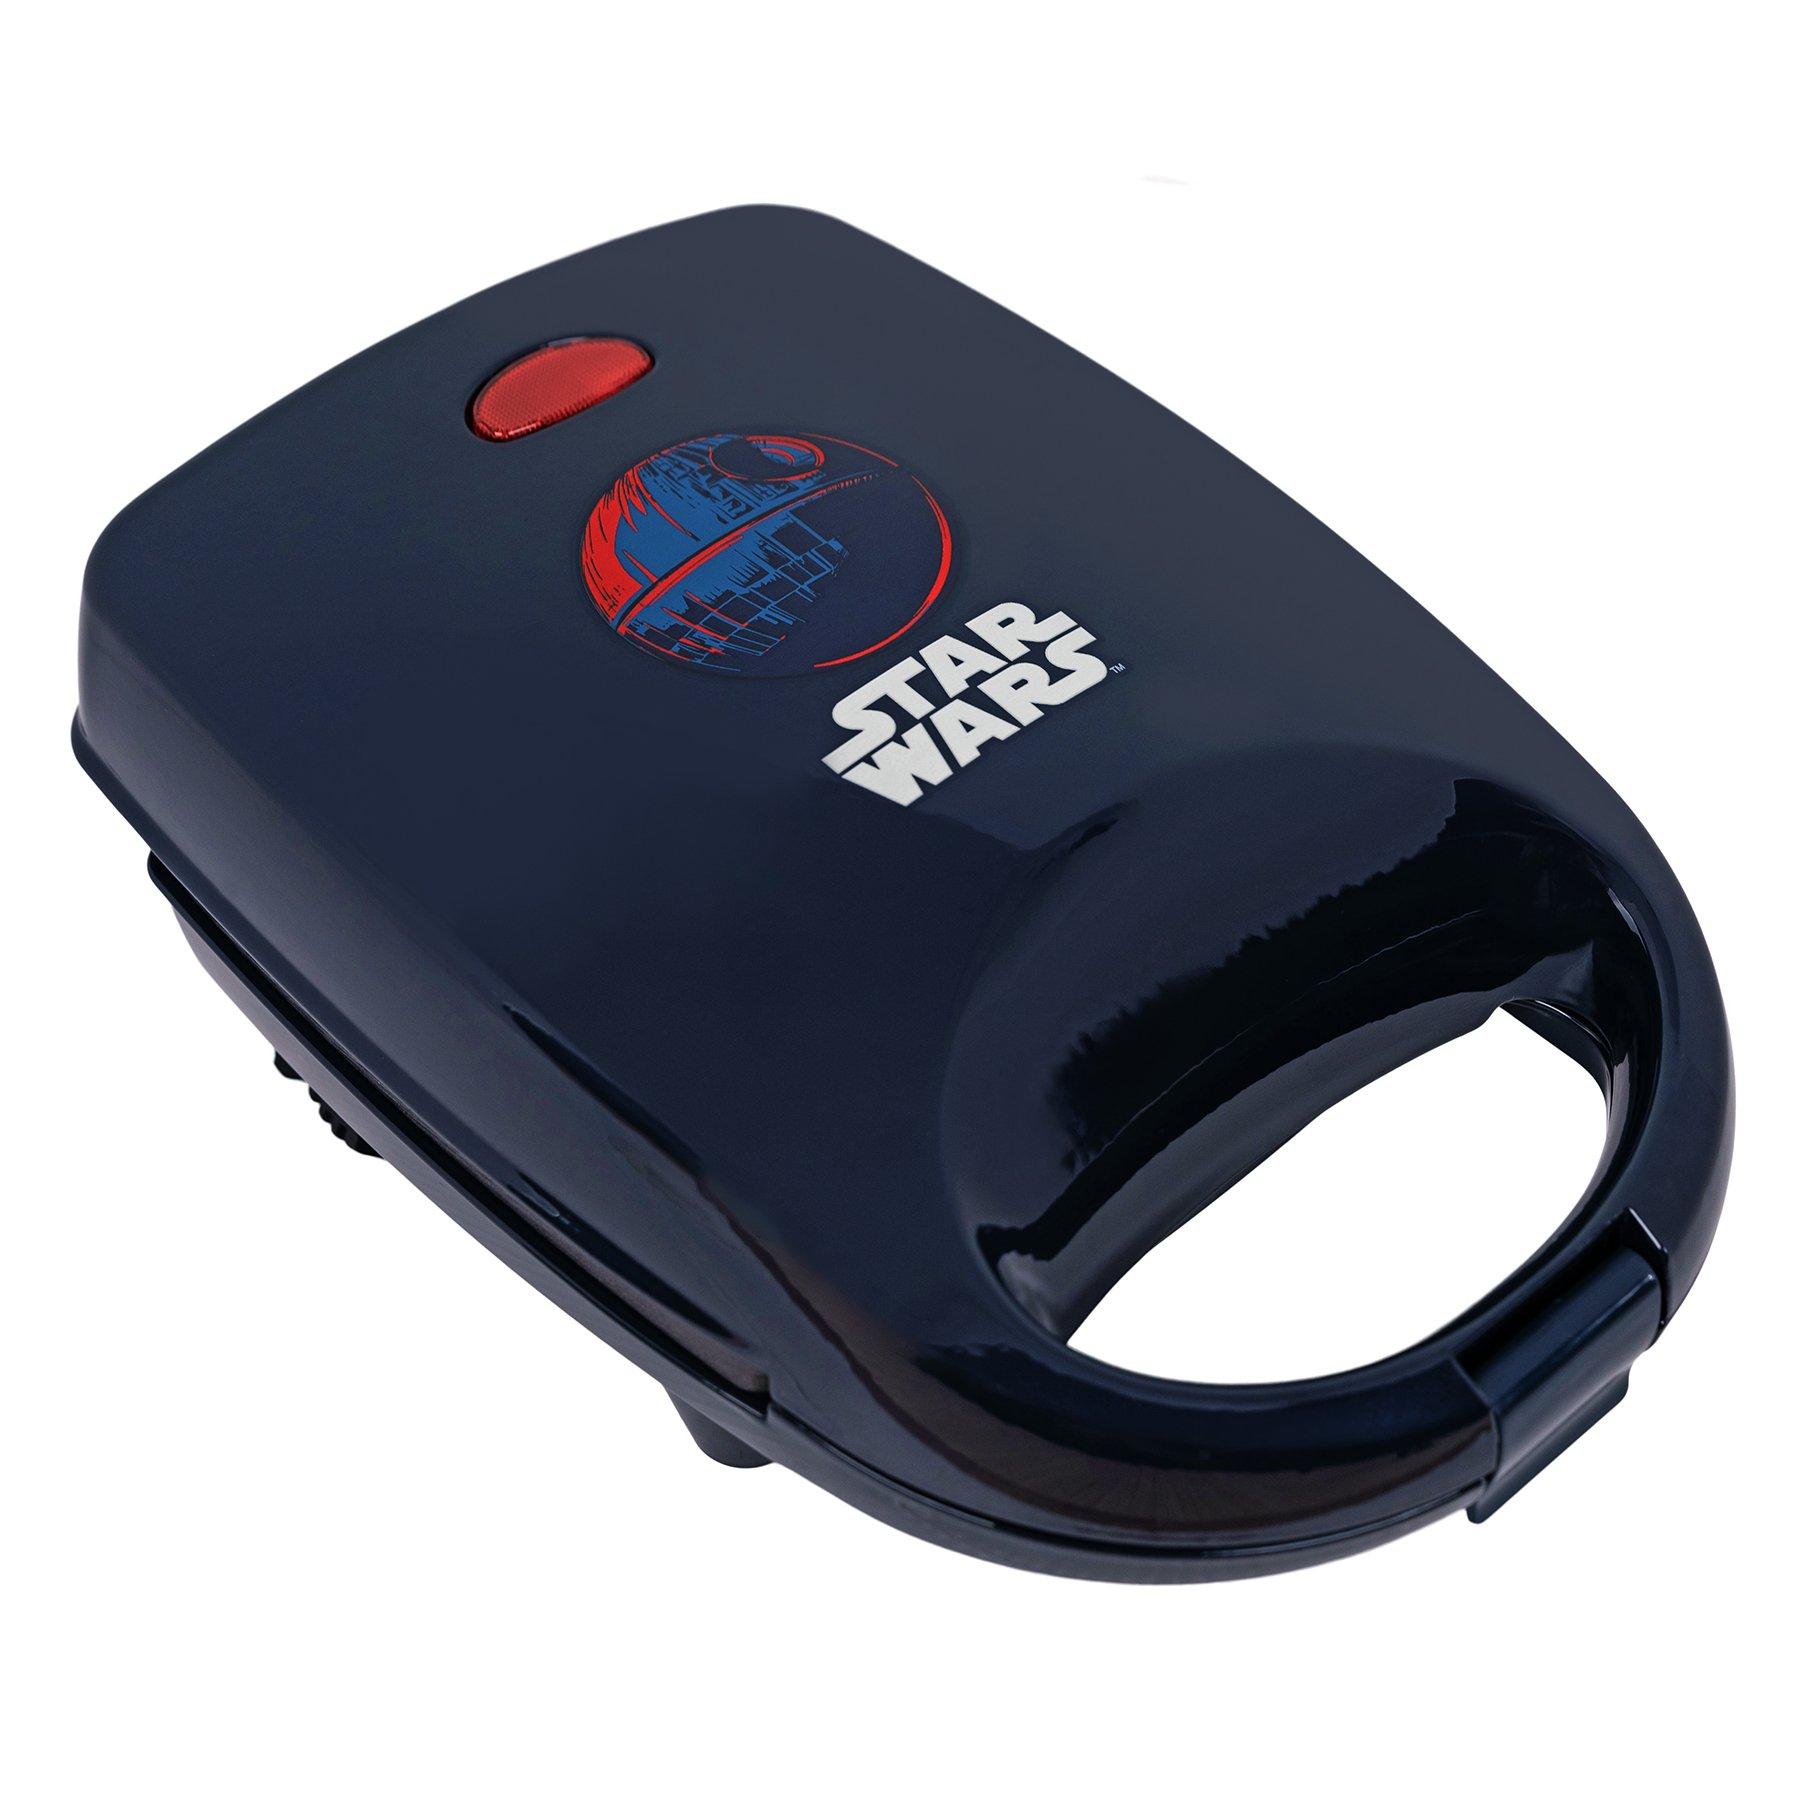 Star Wars Darth Vader and Stormtrooper Grilled Cheese Maker